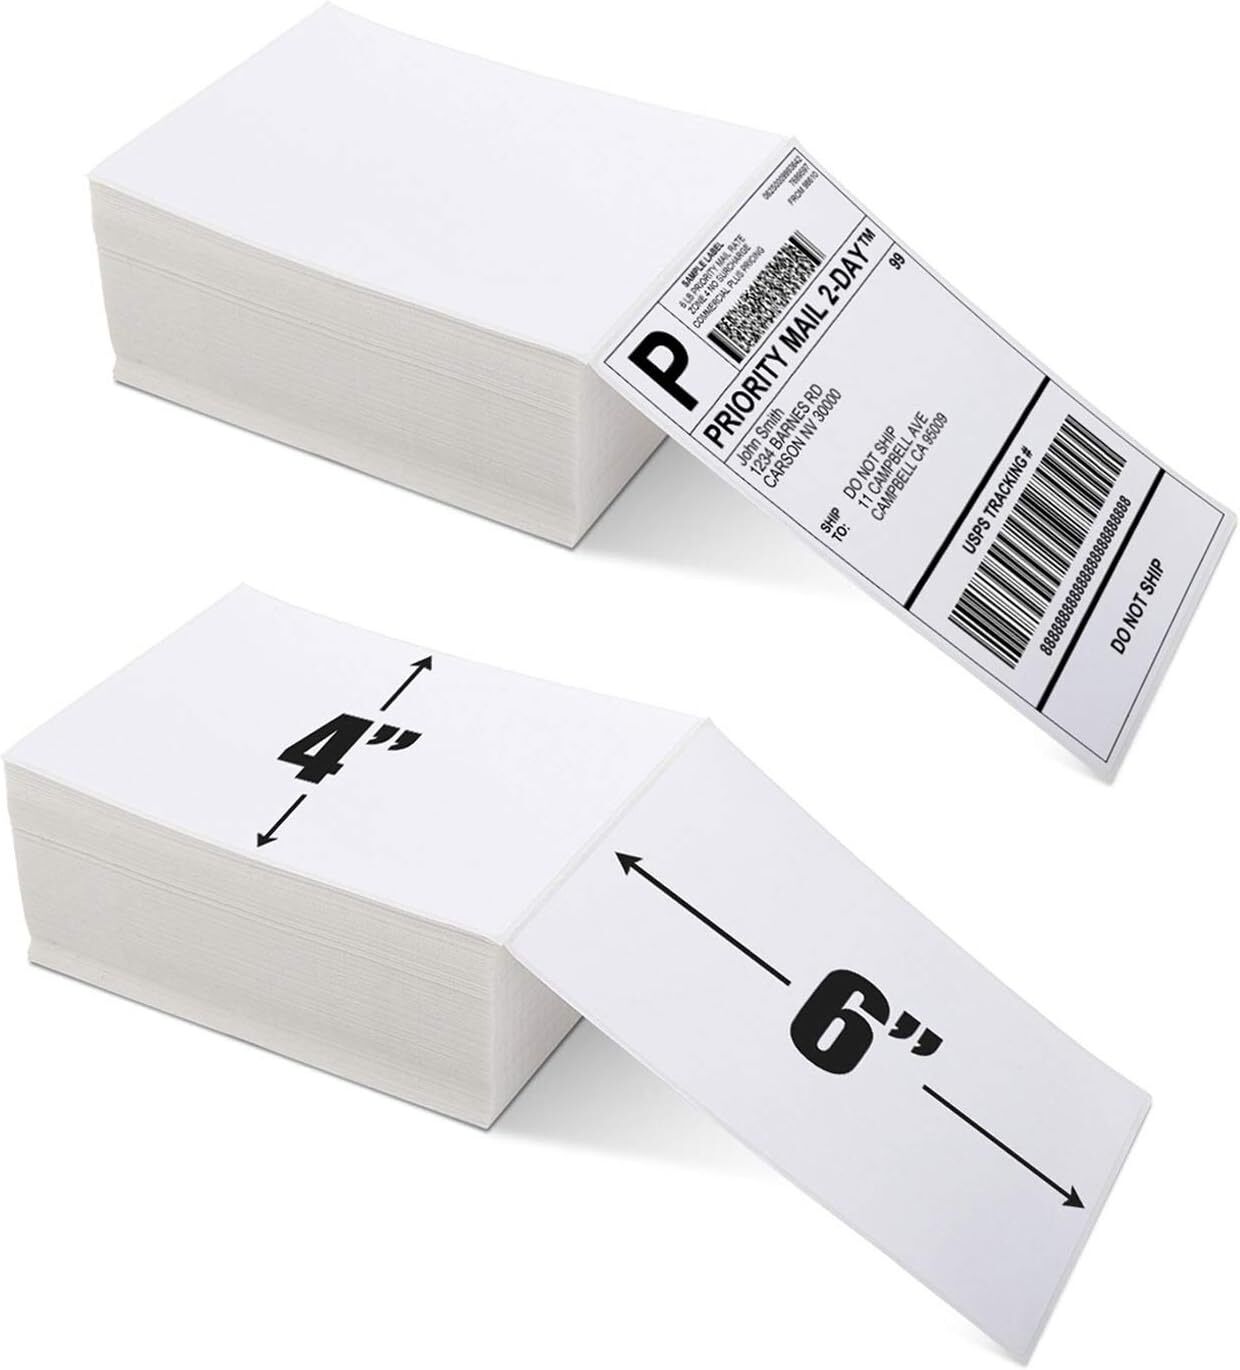 1000PCS Fanfold 4 x 6 Direct Thermal Shipping Labels for Zebra & Rollo Printers